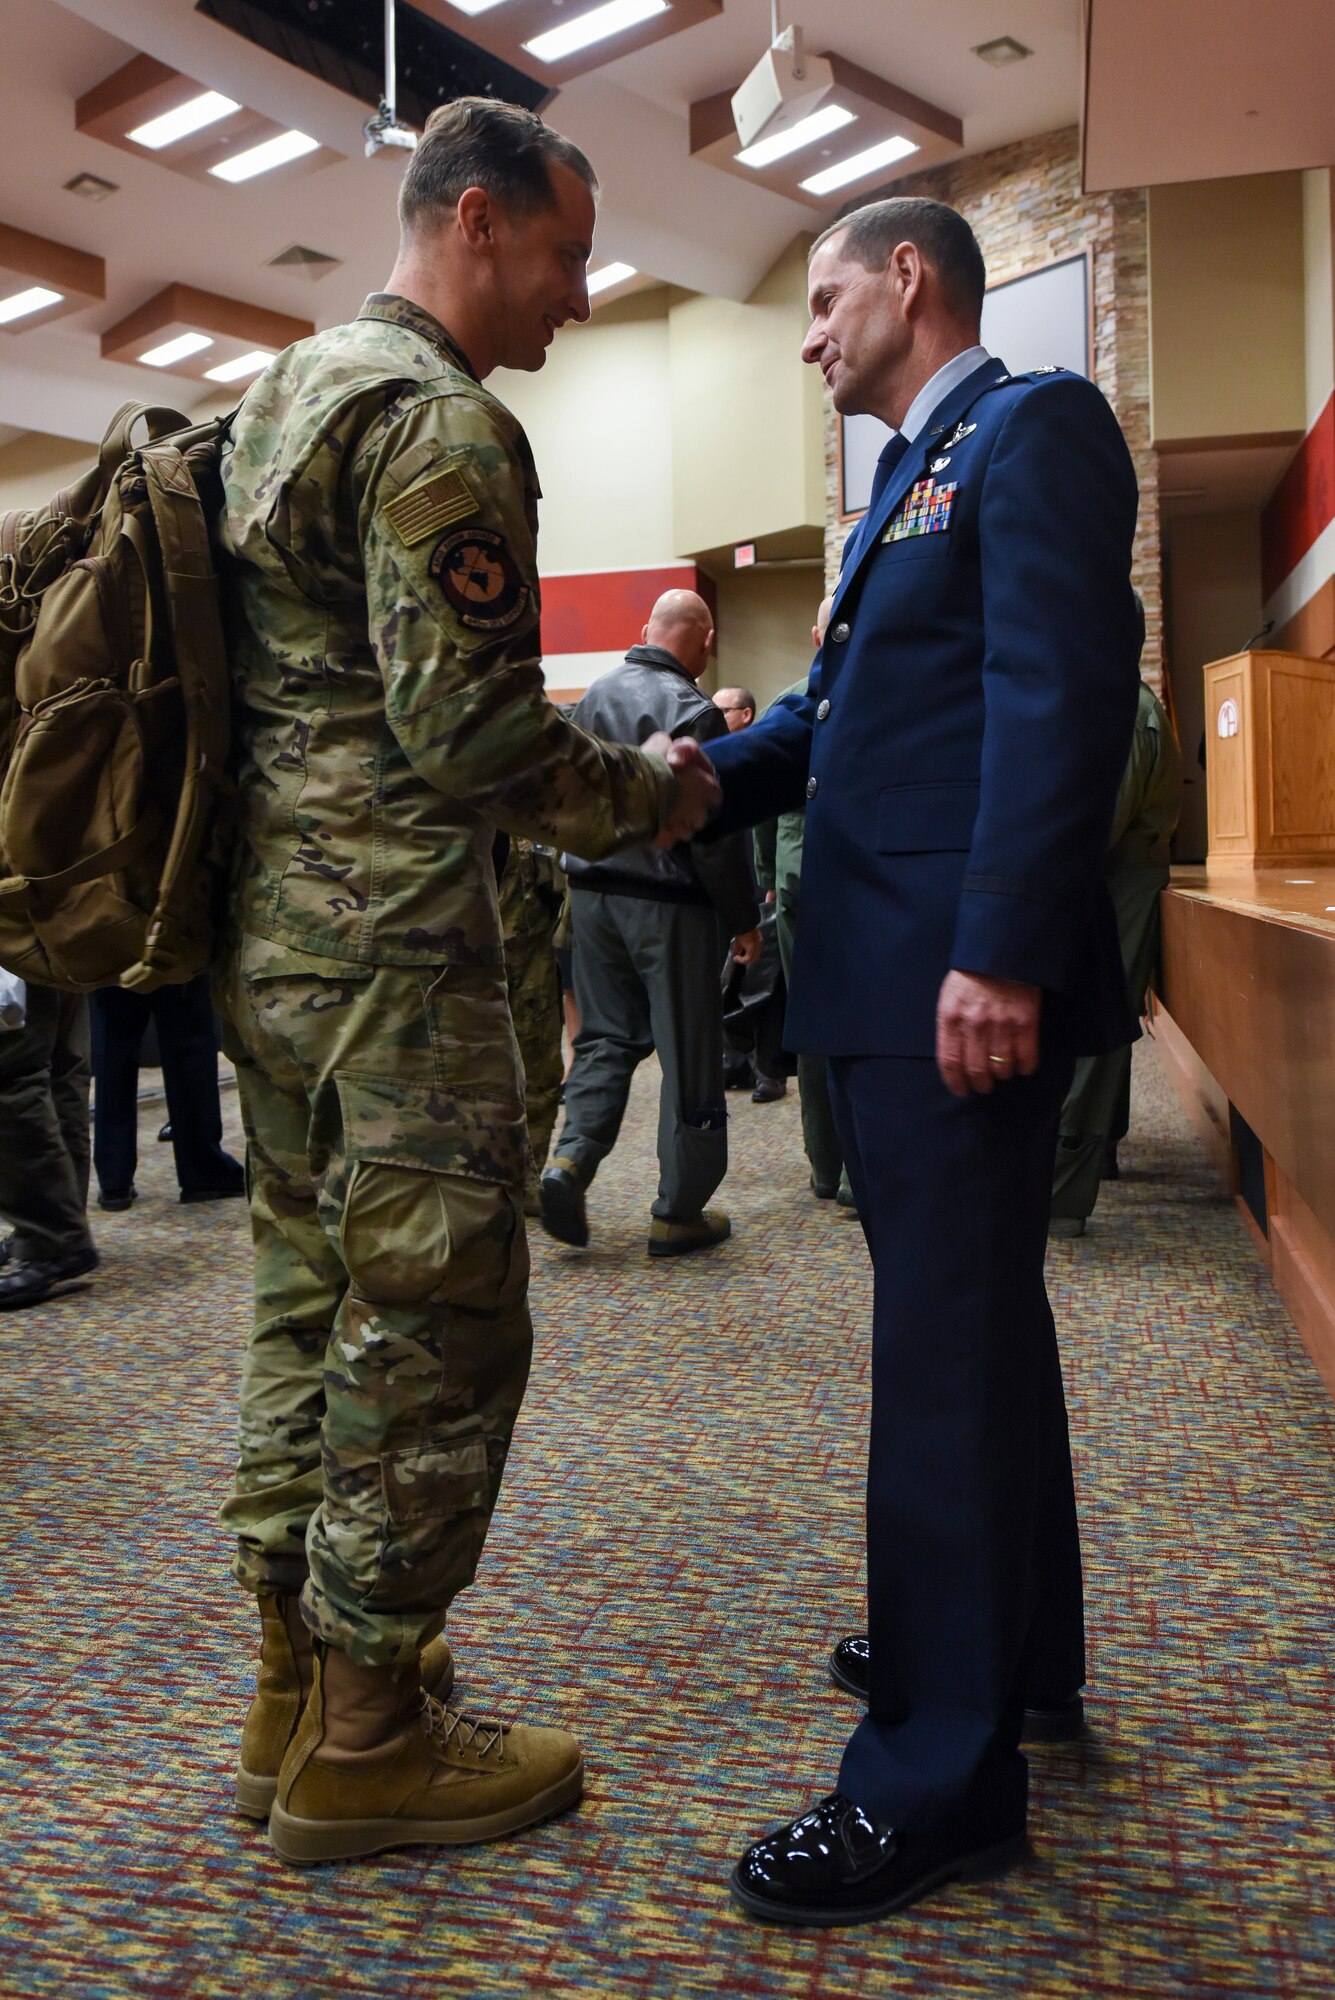 Col. John F. Robinson, 911th Airlift Wing commander, shakes the hand of an Airman of the 445th Operations Group from Wright-Patterson Air Force Base, Ohio, after his assumption of command ceremony in Coraopolis, Pennsylvania, Nov. 2, 2019.